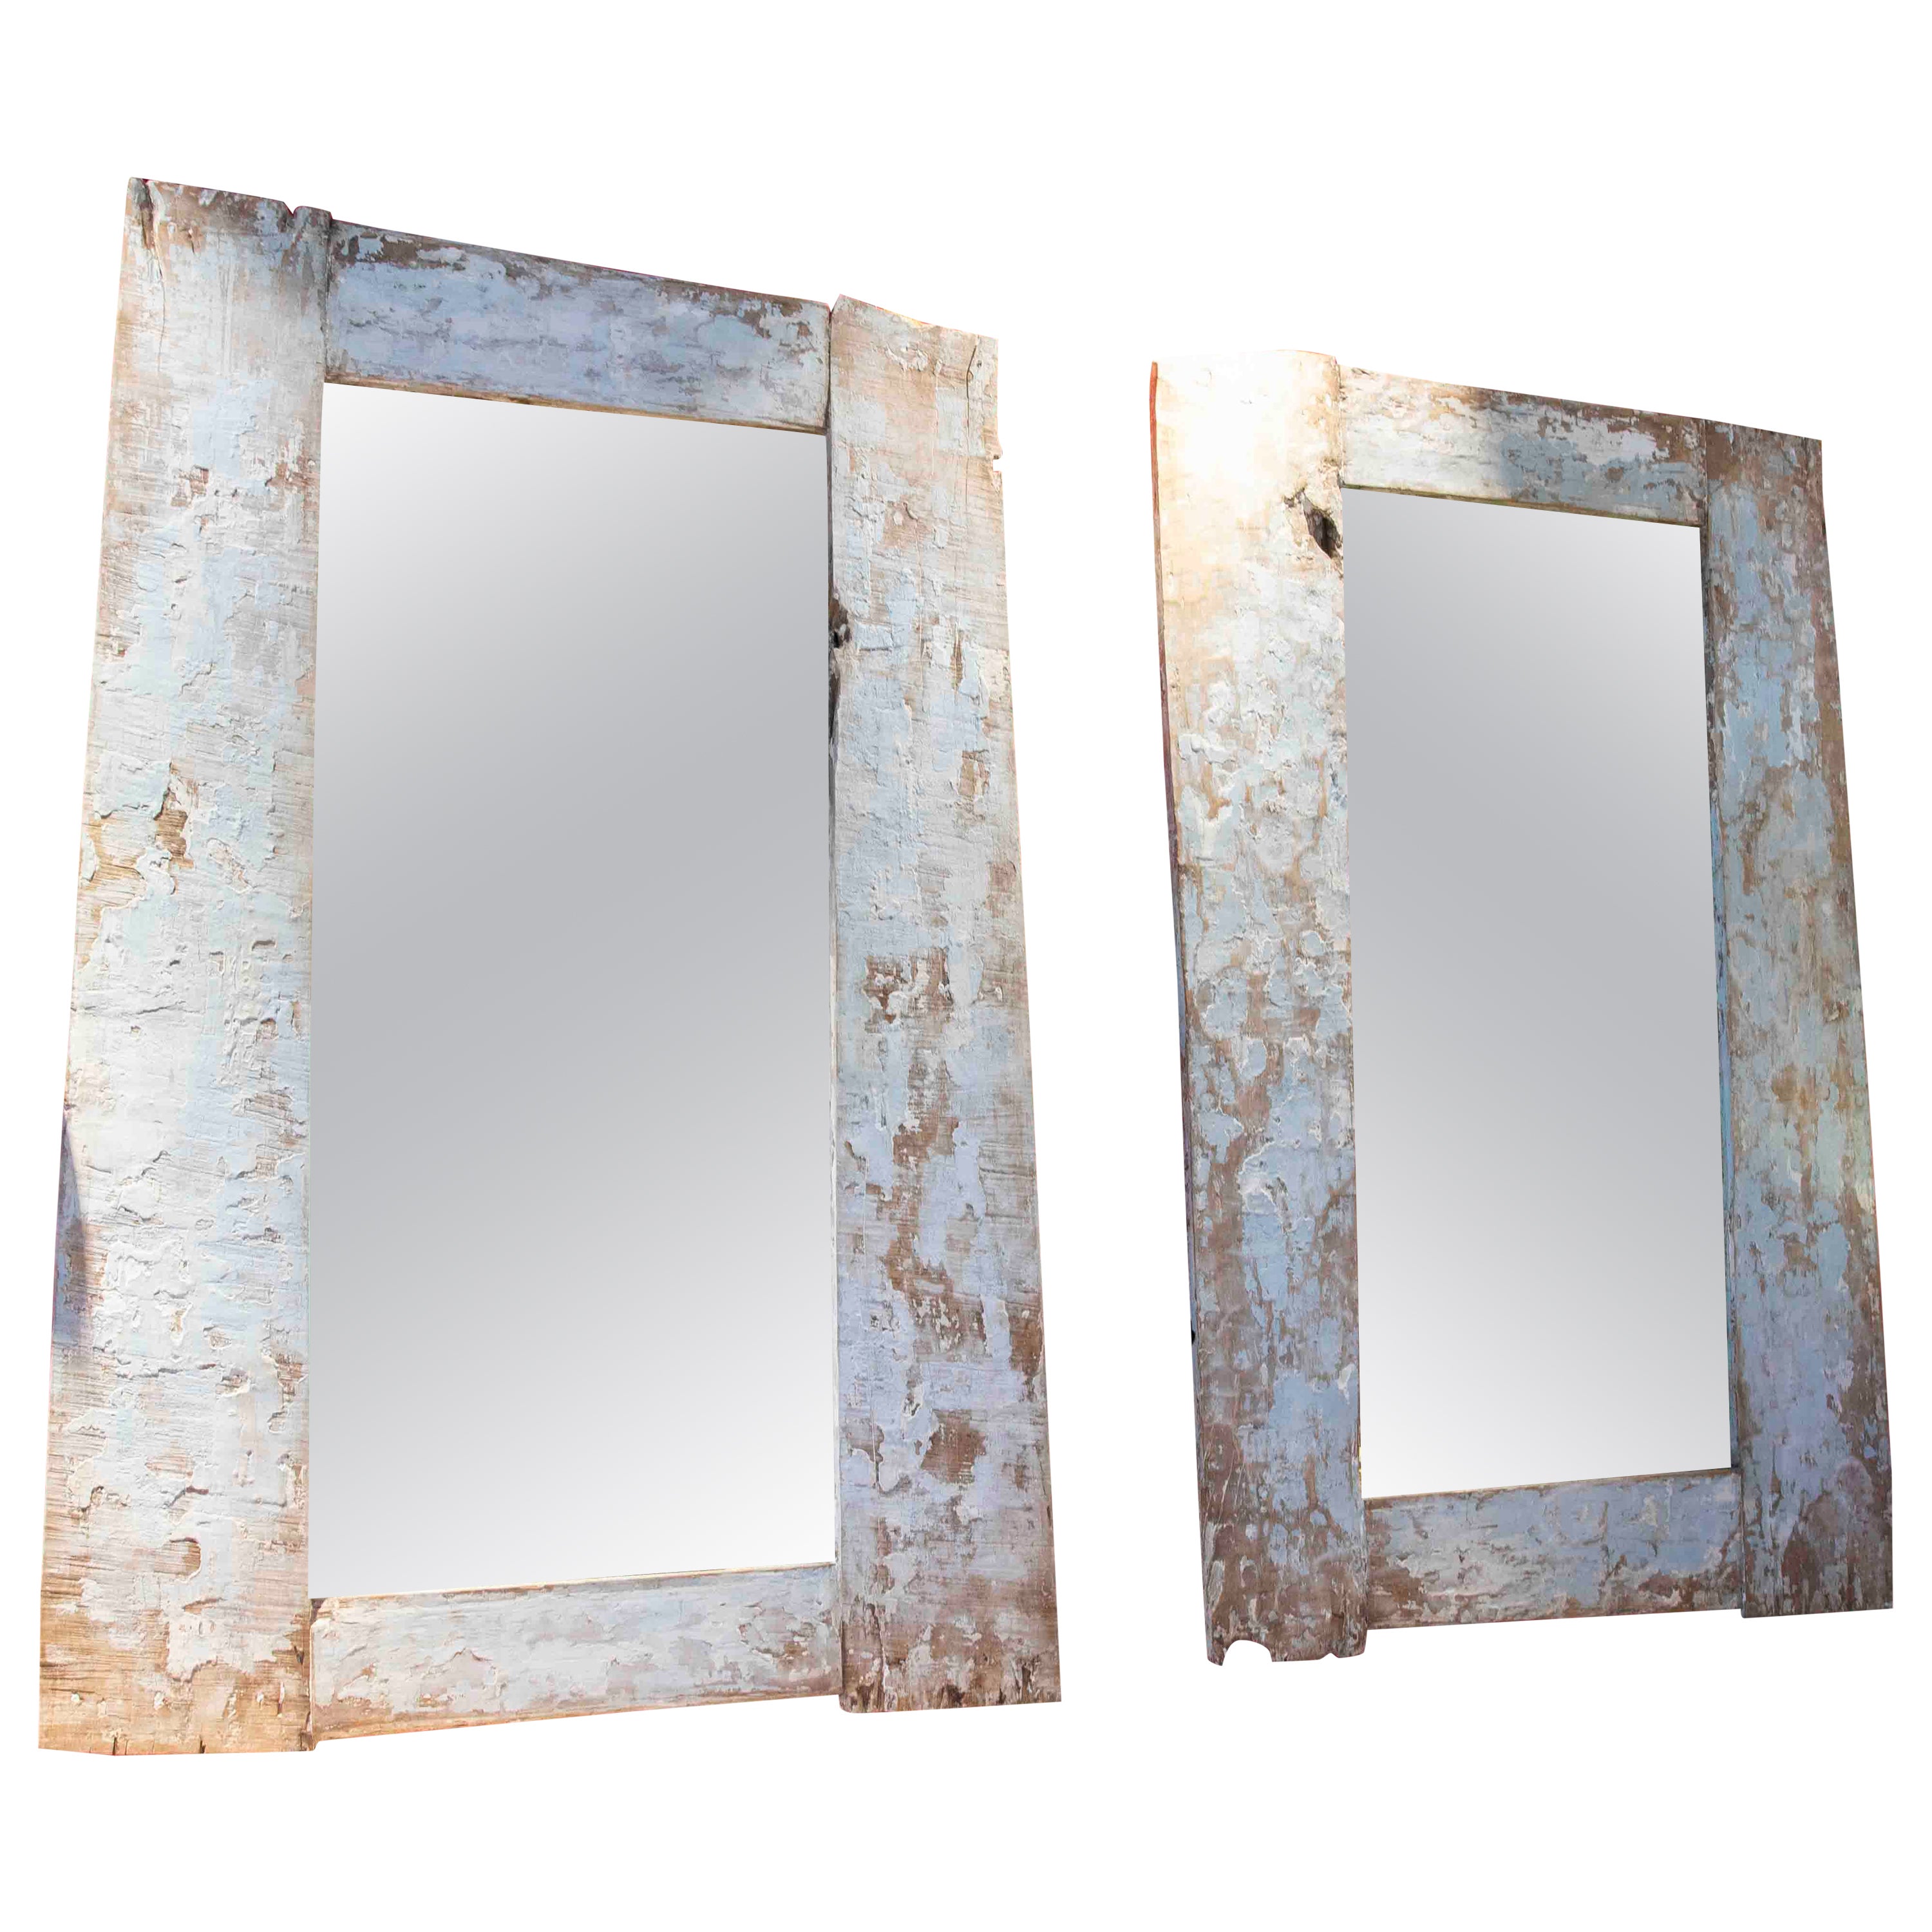 Pair of Rustic Polychromed Wooden Mirrors in Antique White Tones